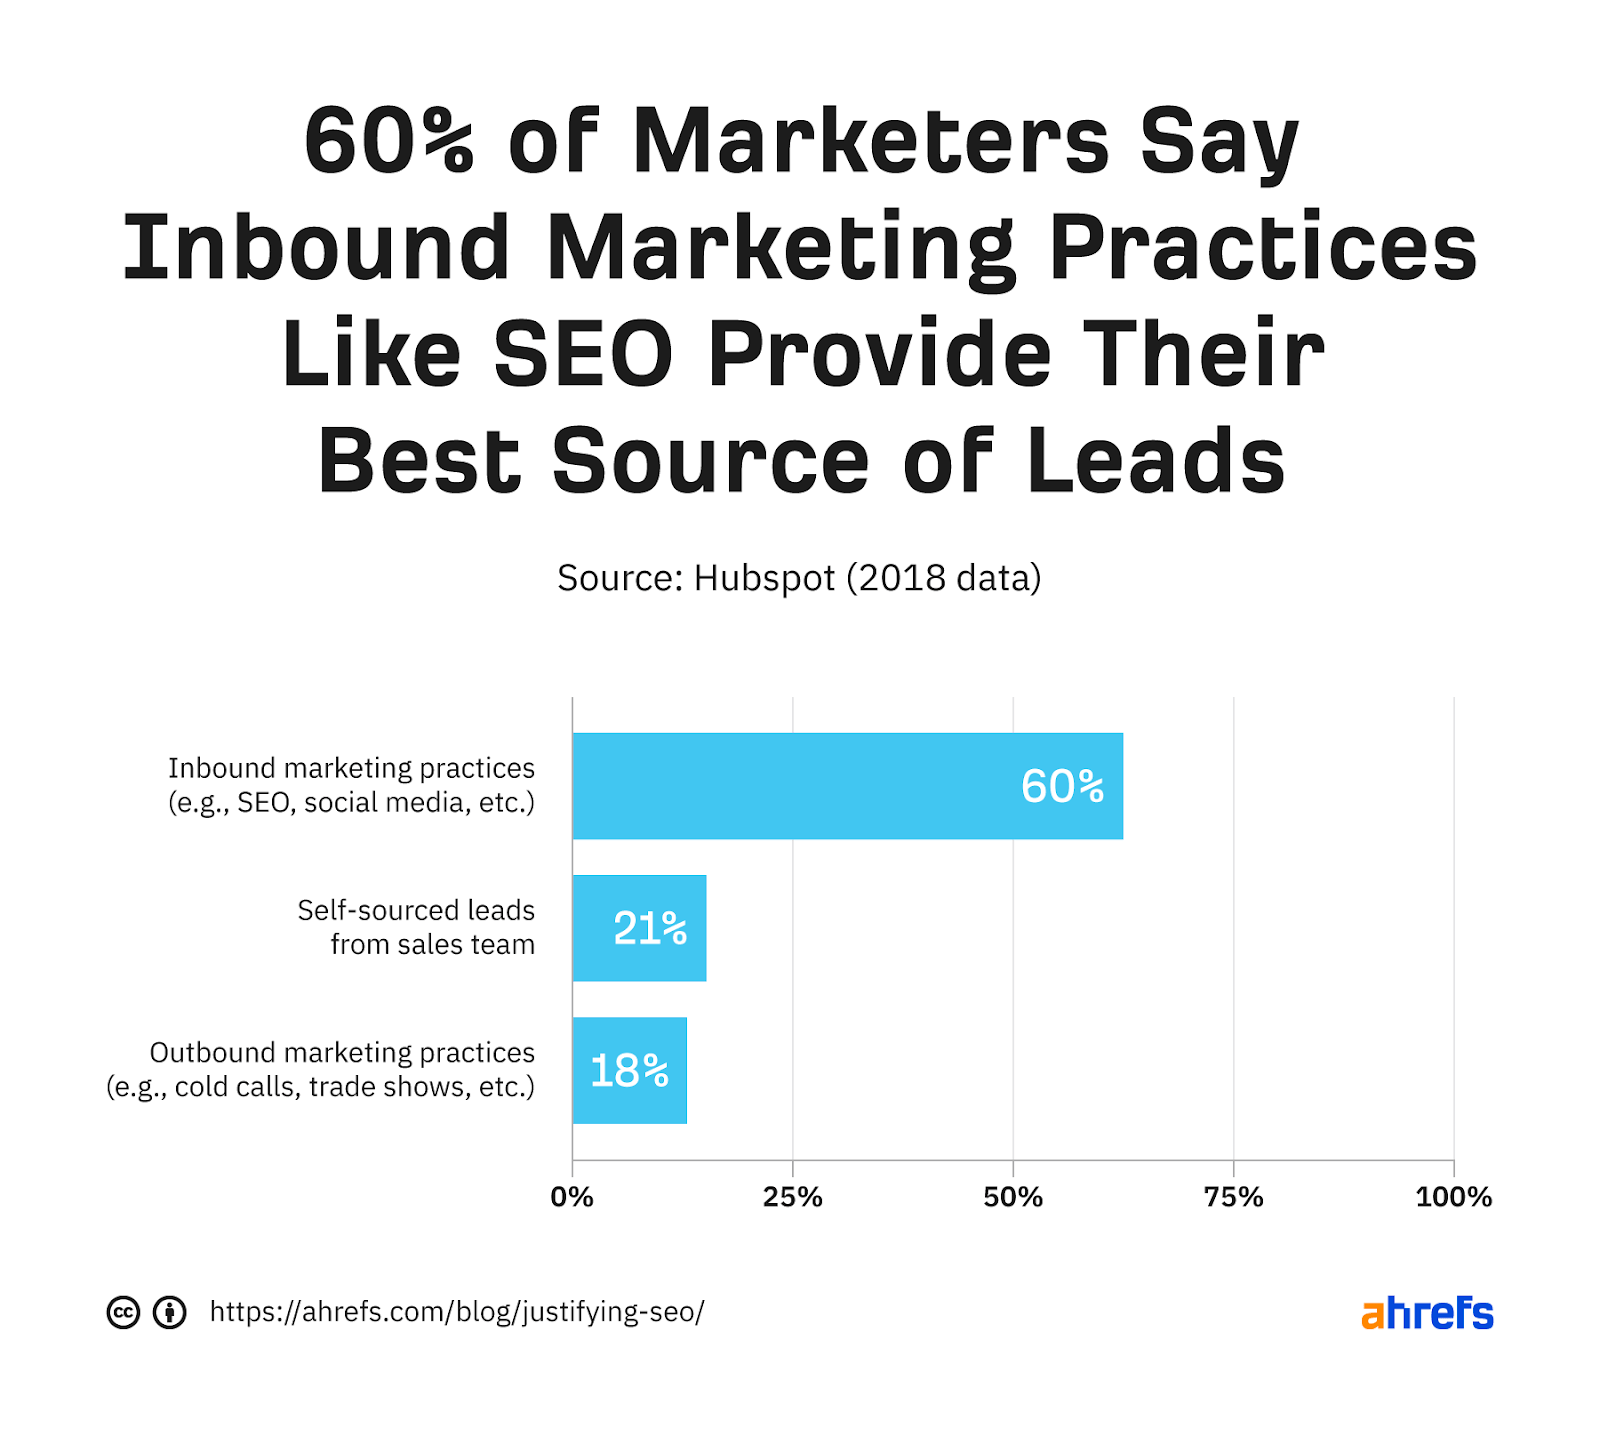 60% of marketers consider SEO to be one of the top sources of leads